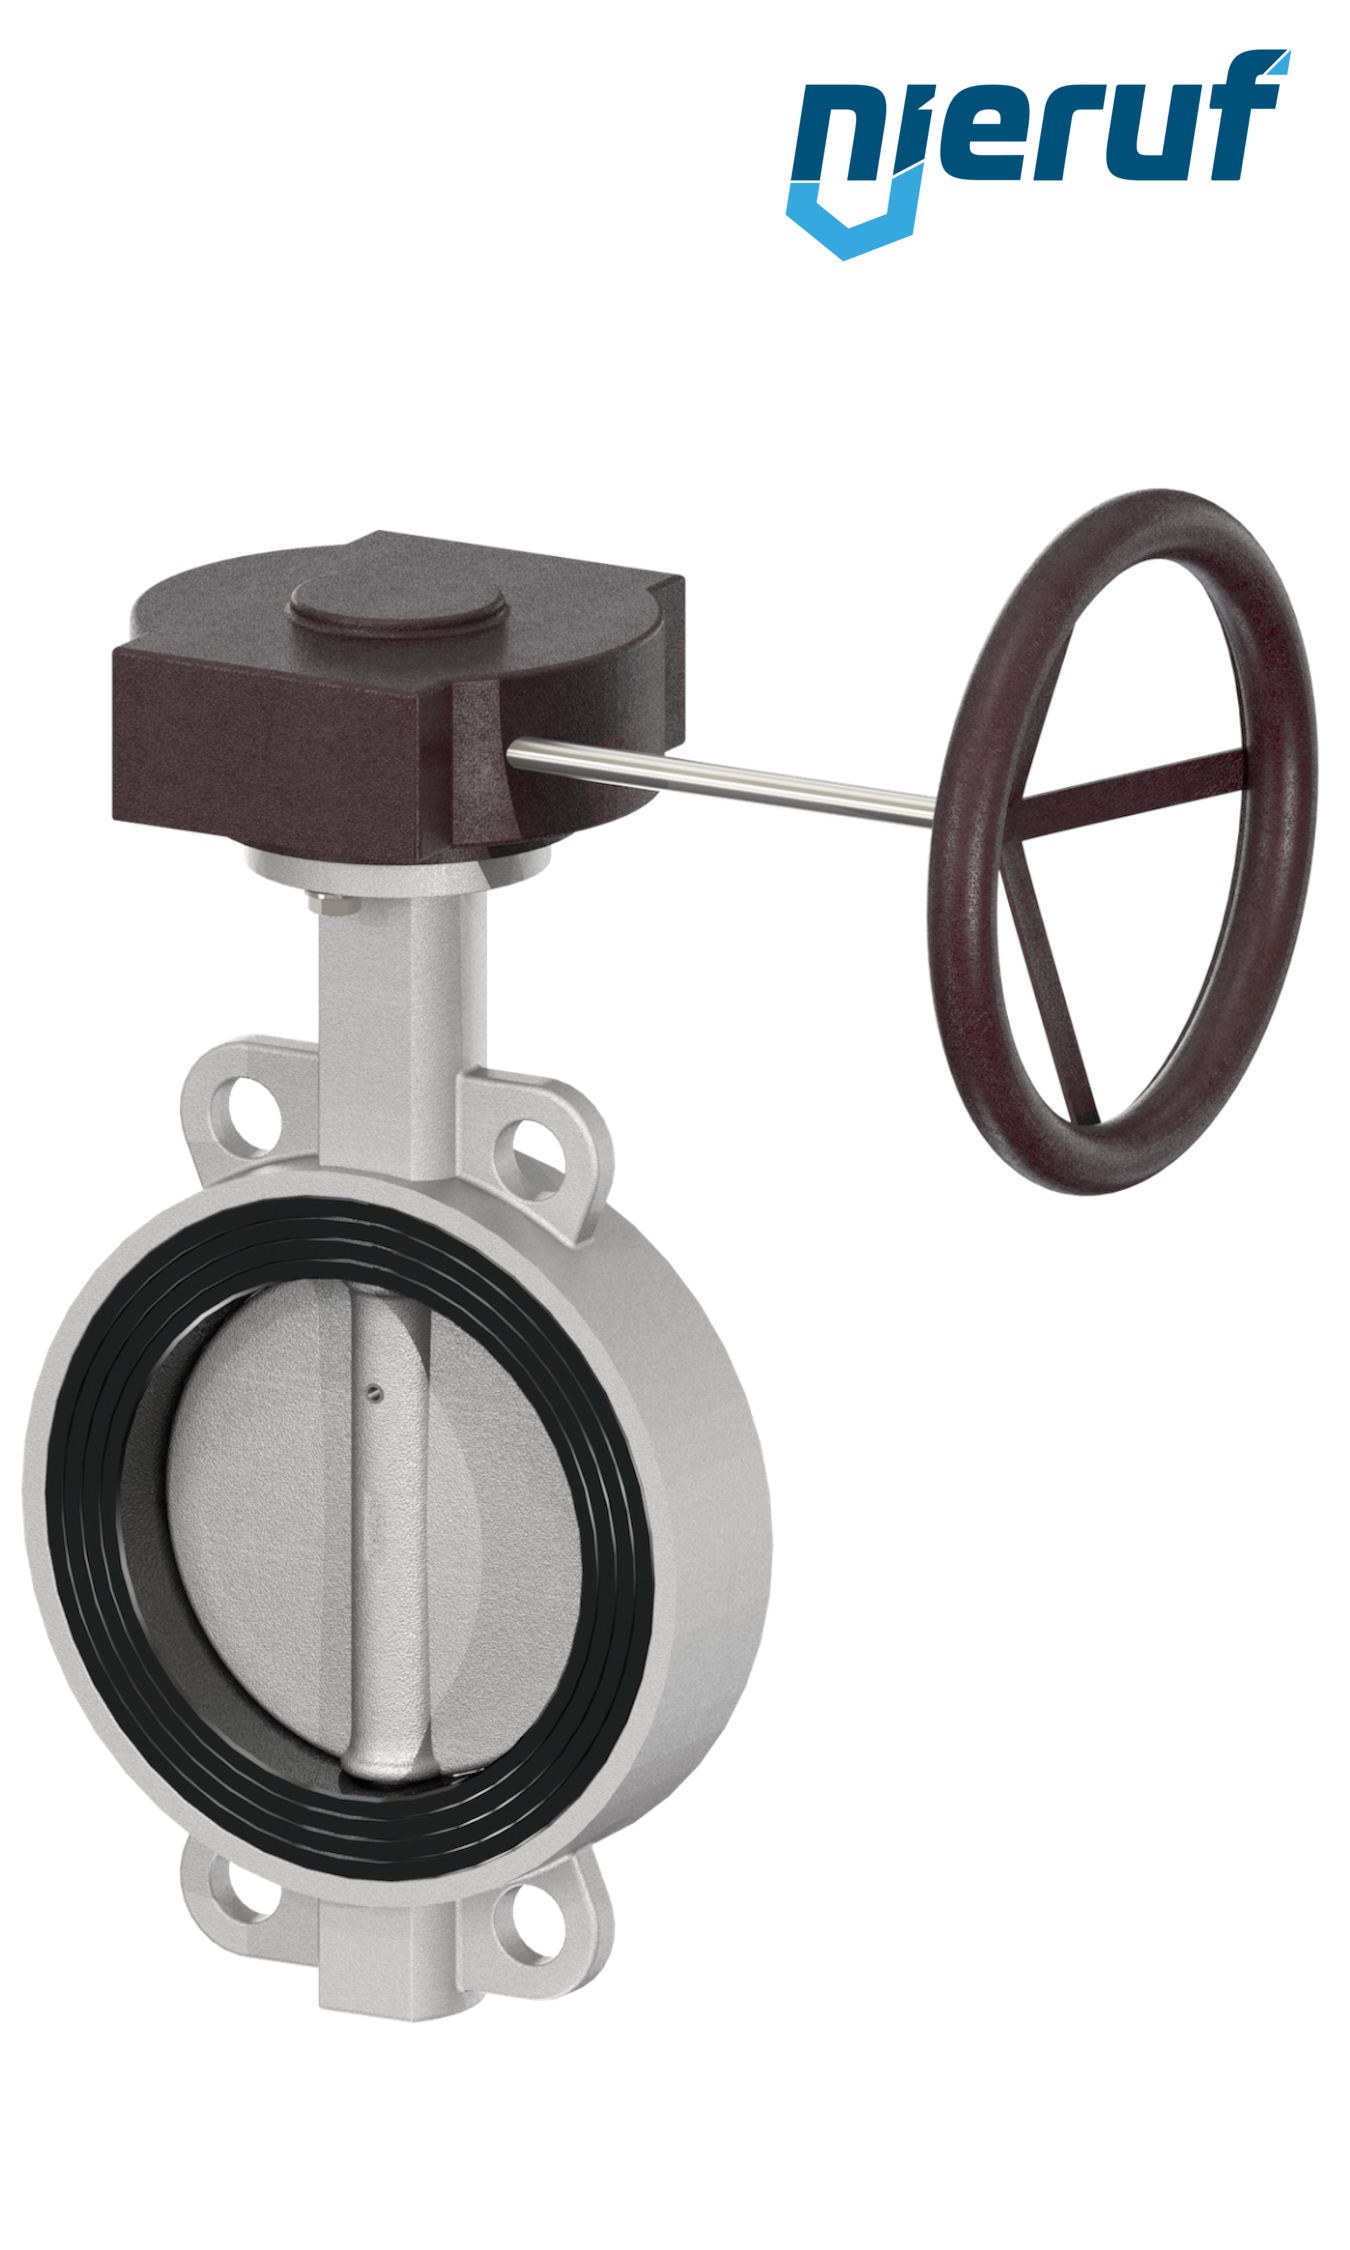 Butterfly-valve-stainless-steel DN 100 PN16 AK08 EPDM gearbox